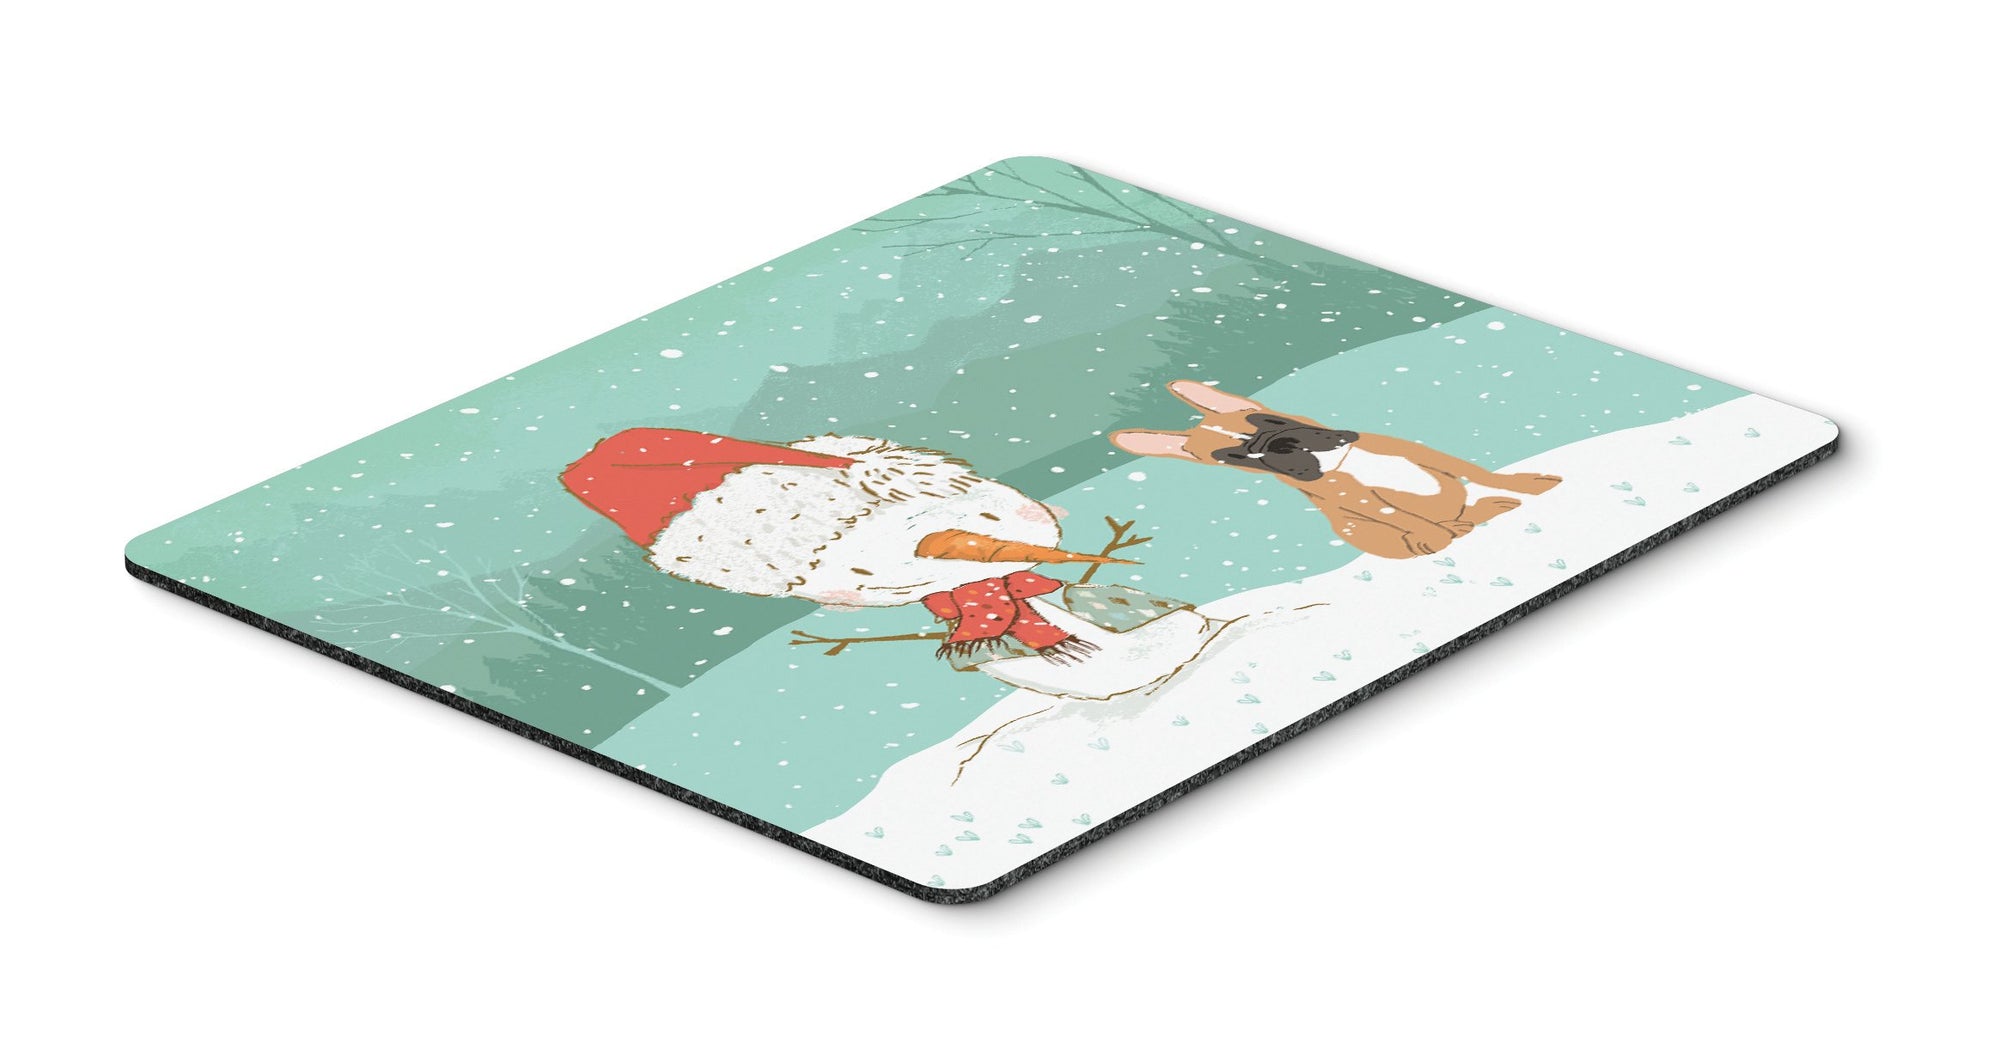 Fawn French Bulldog Snowman Christmas Mouse Pad, Hot Pad or Trivet CK2086MP by Caroline's Treasures